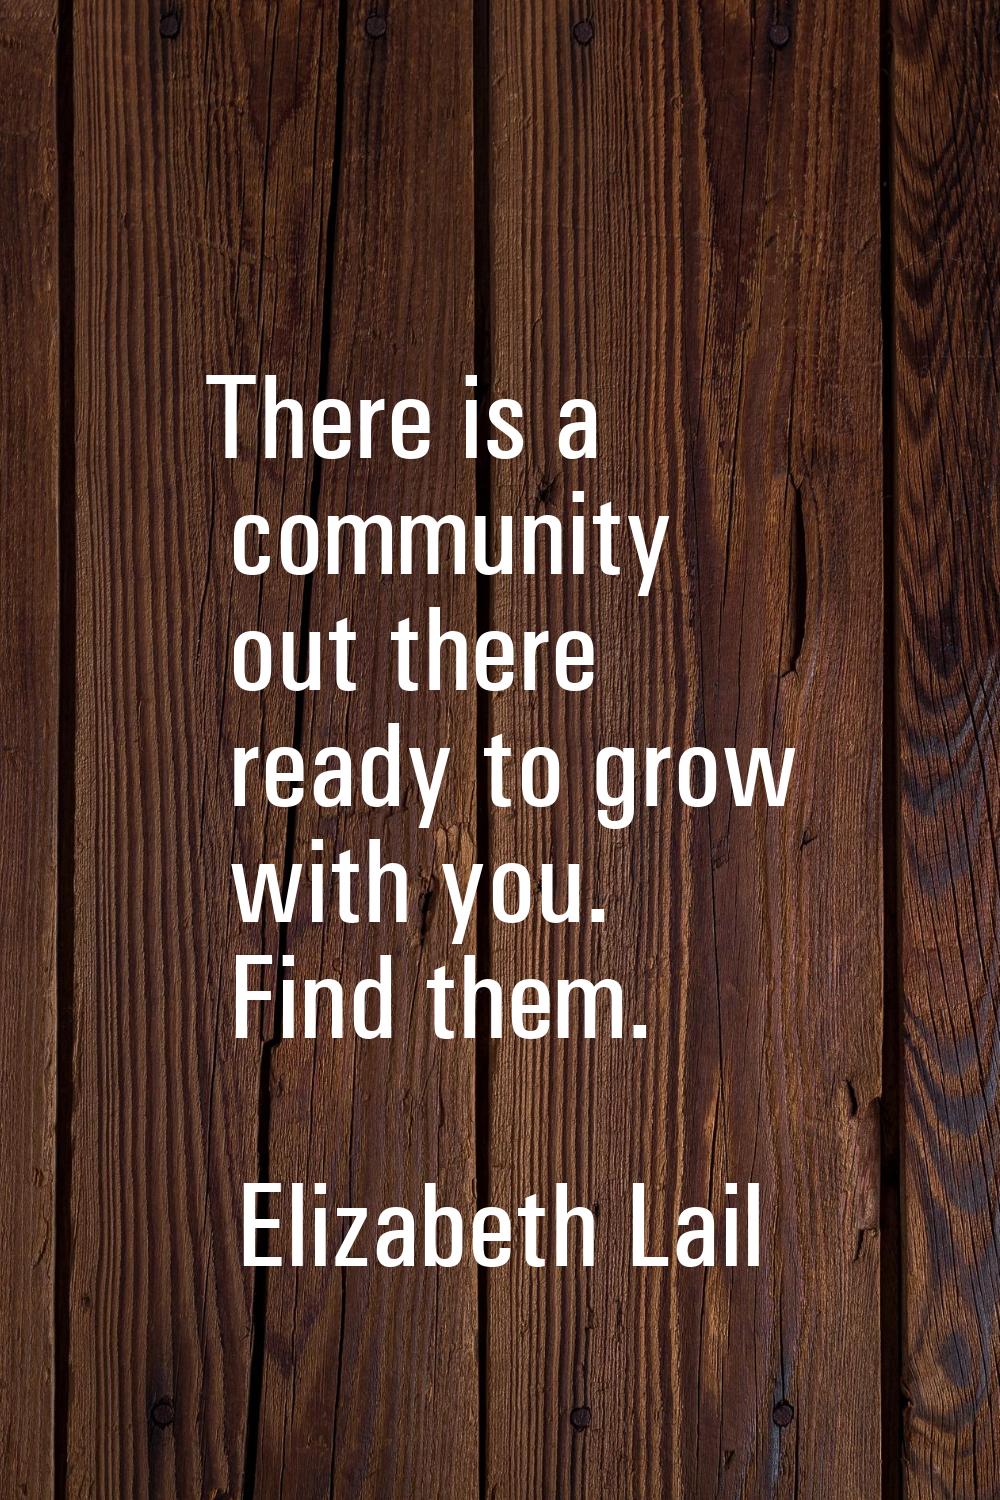 There is a community out there ready to grow with you. Find them.